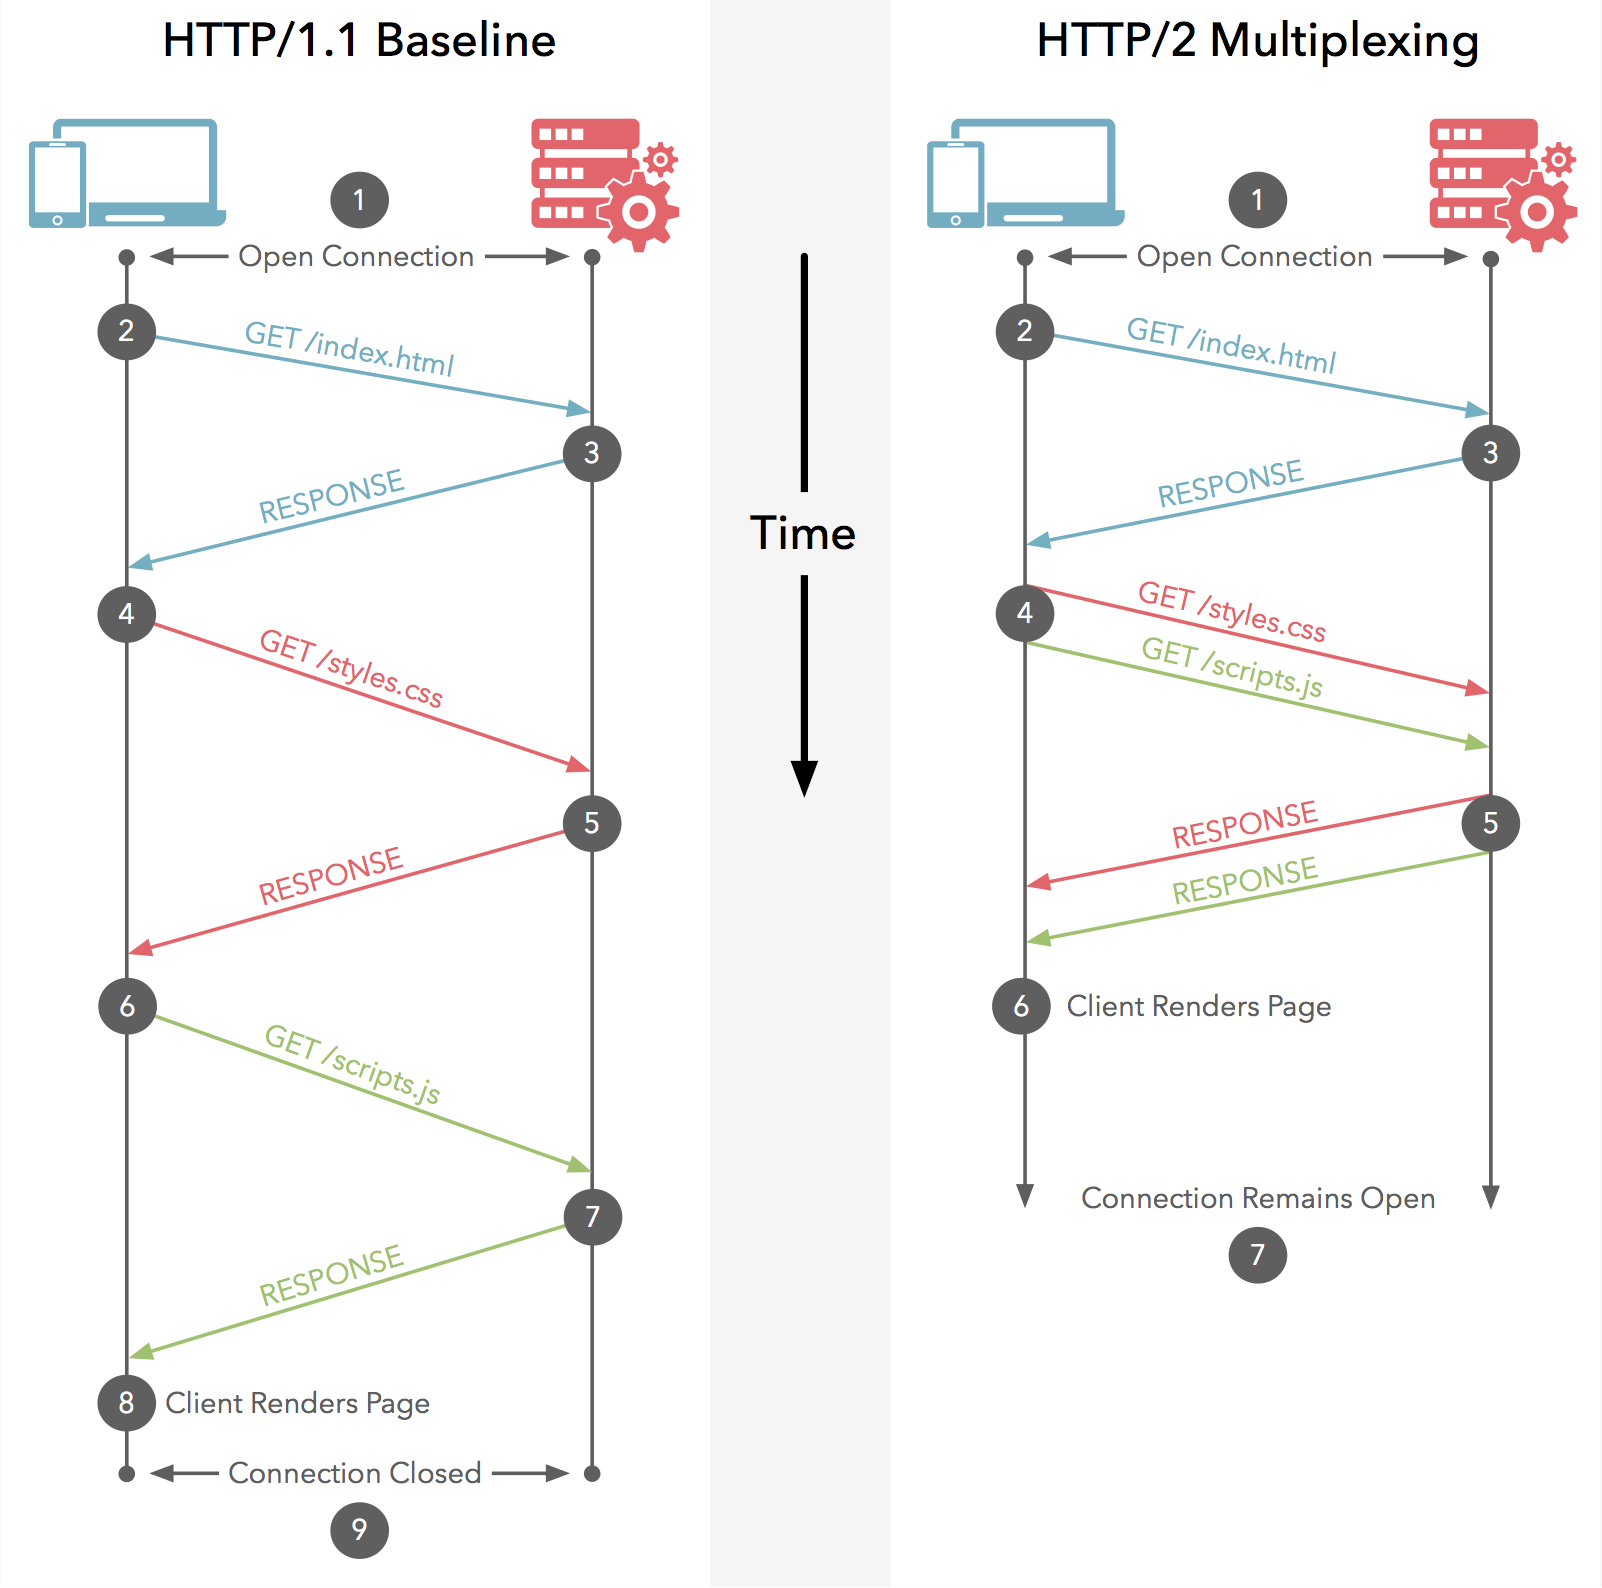 ../../_images/http-http2-multiplexing.png